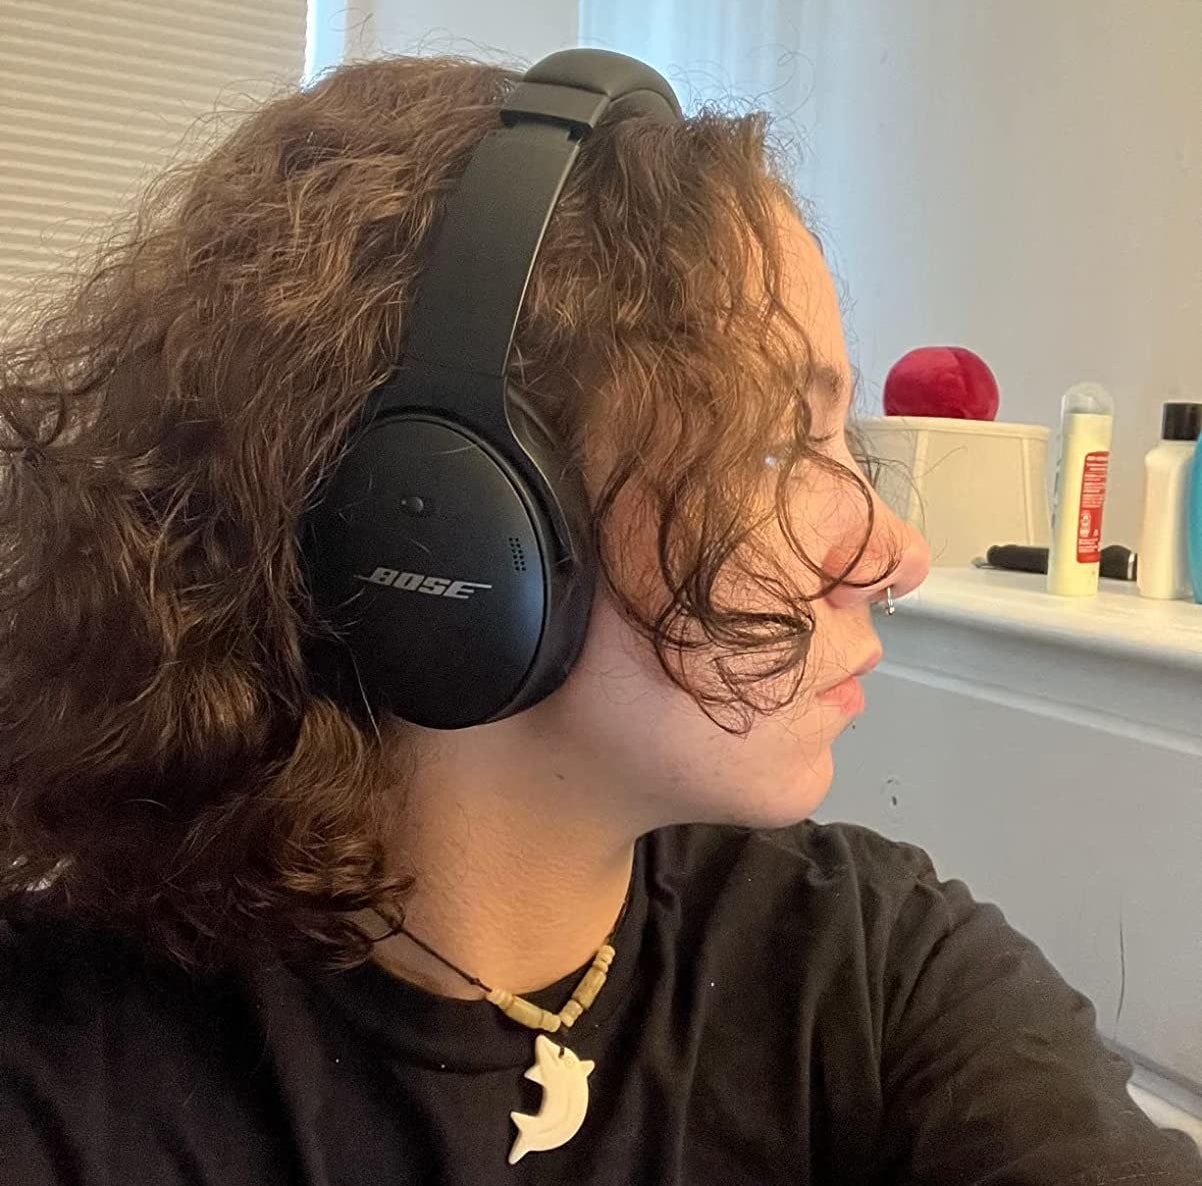 reviewer from side with black headphones over ear